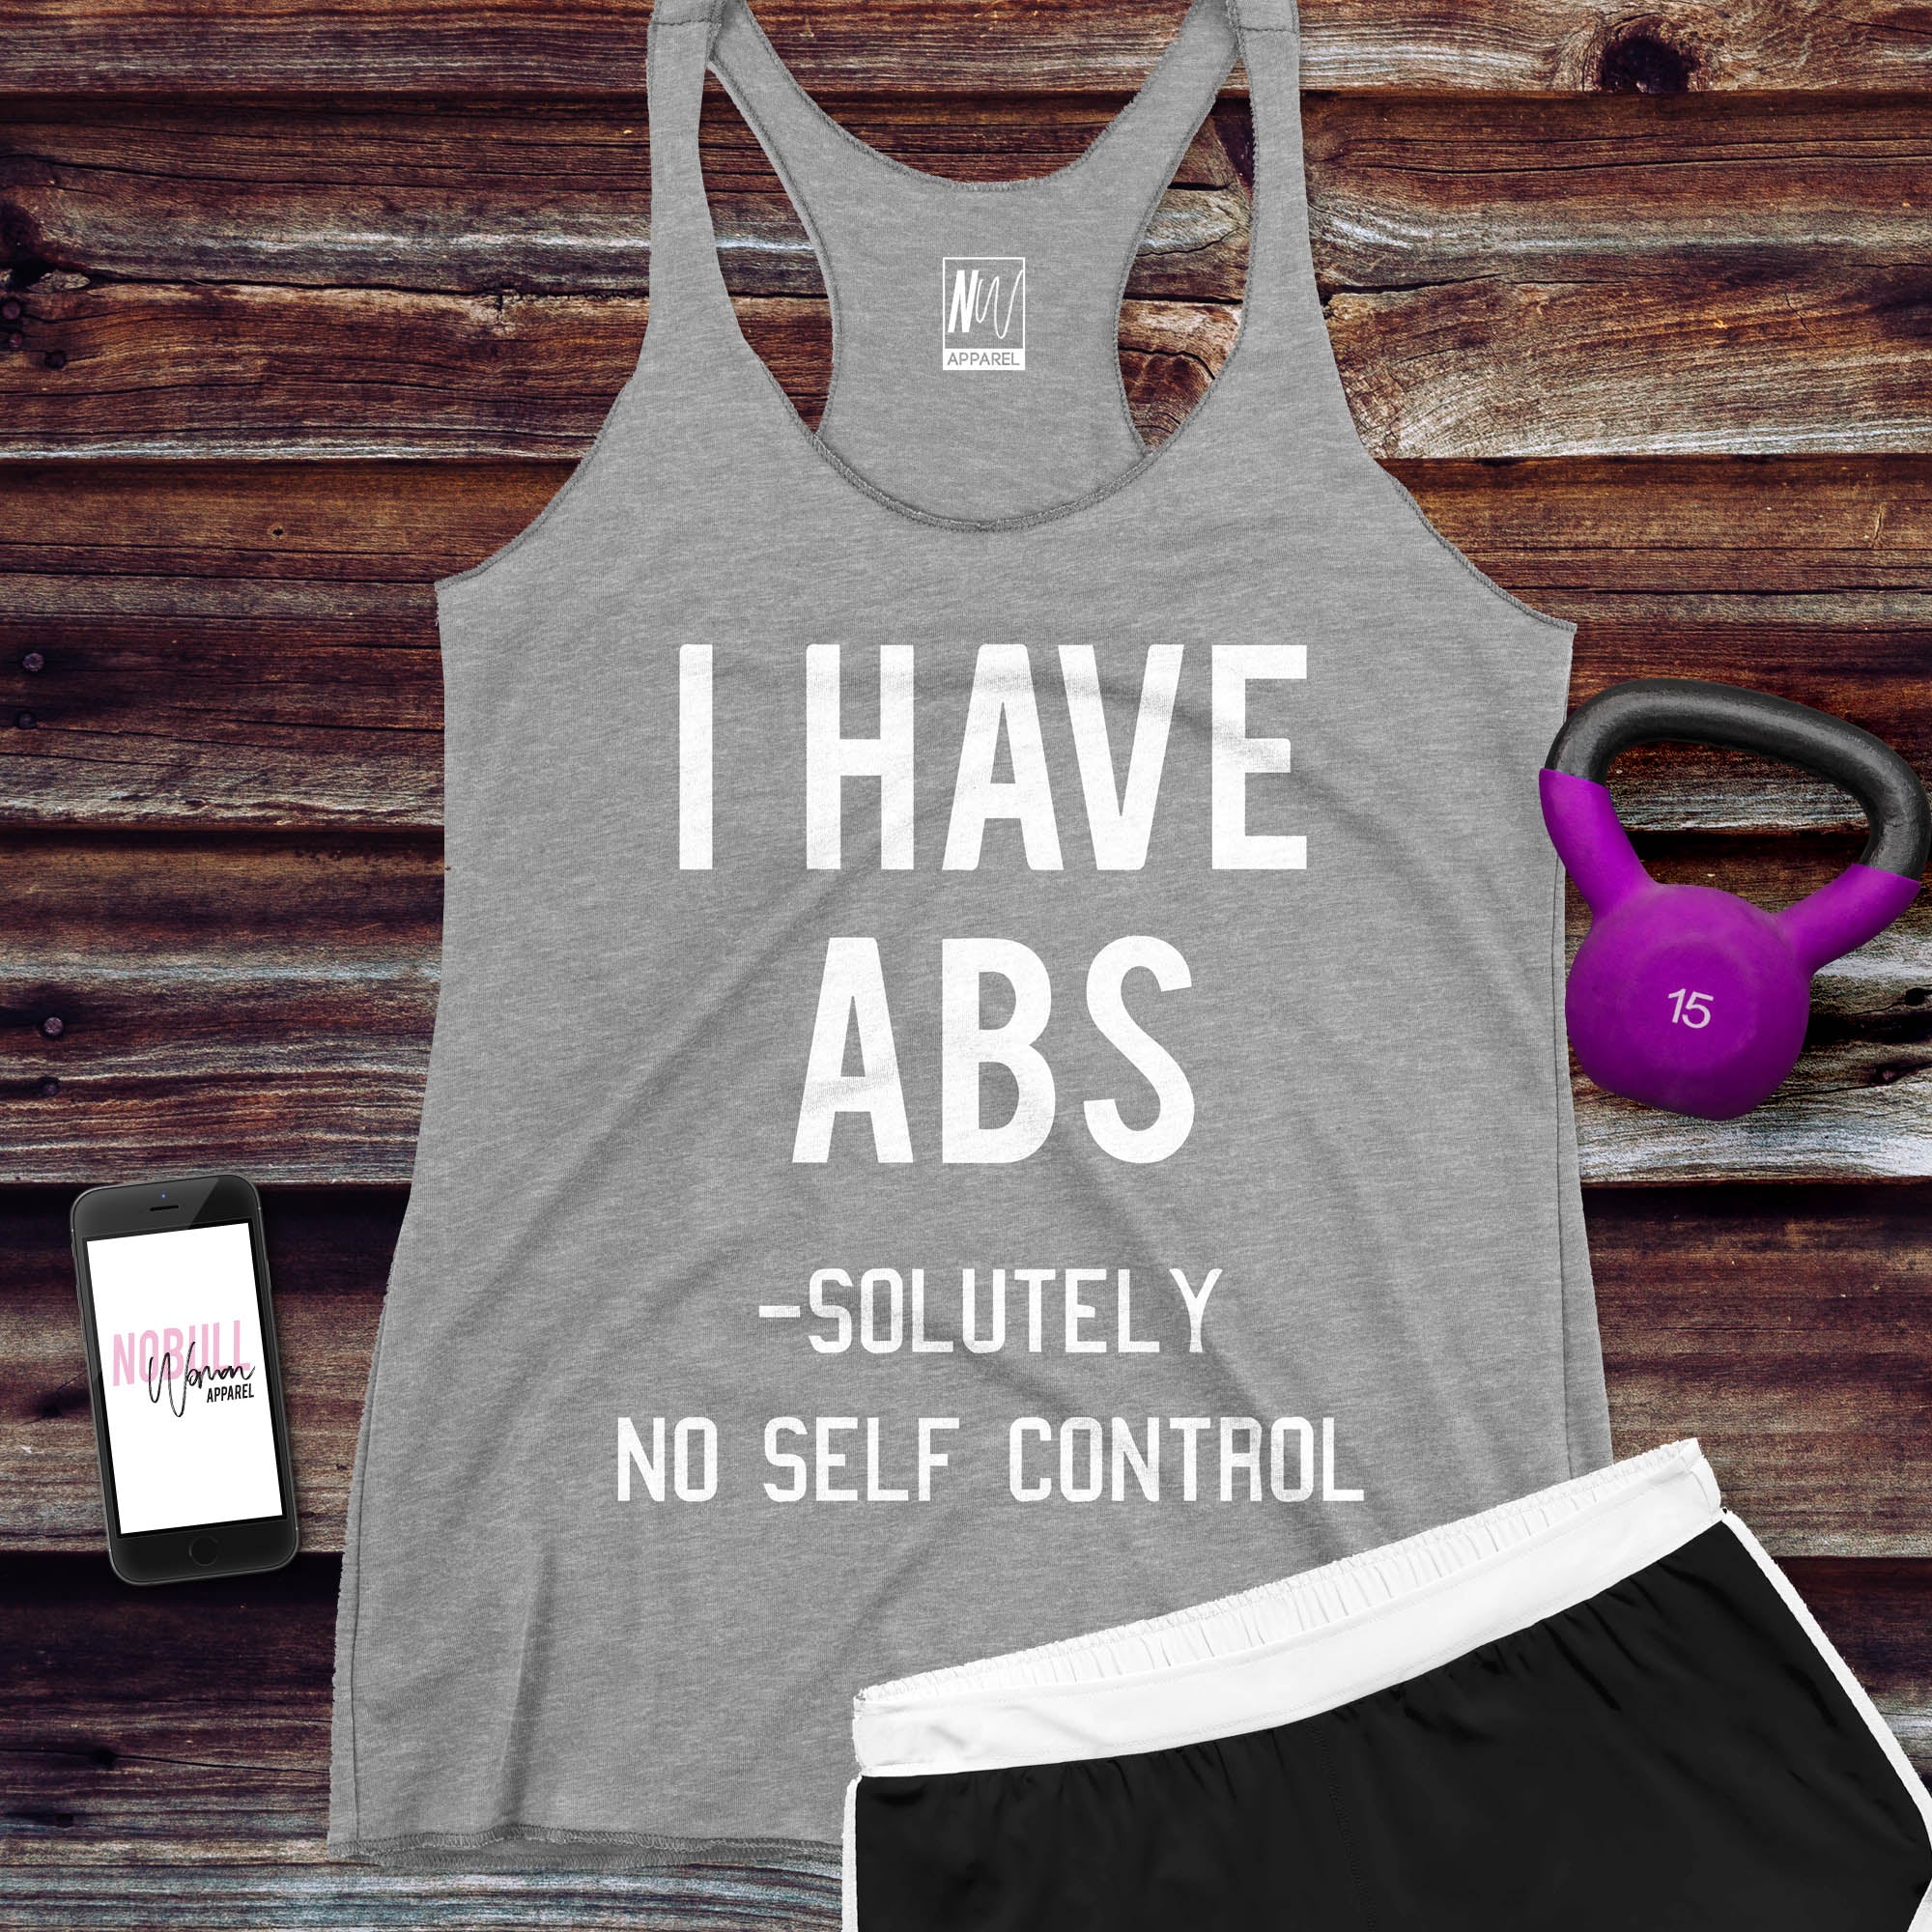 I HAVE ABS Tank Top Heather Gray – NobullWoman Apparel